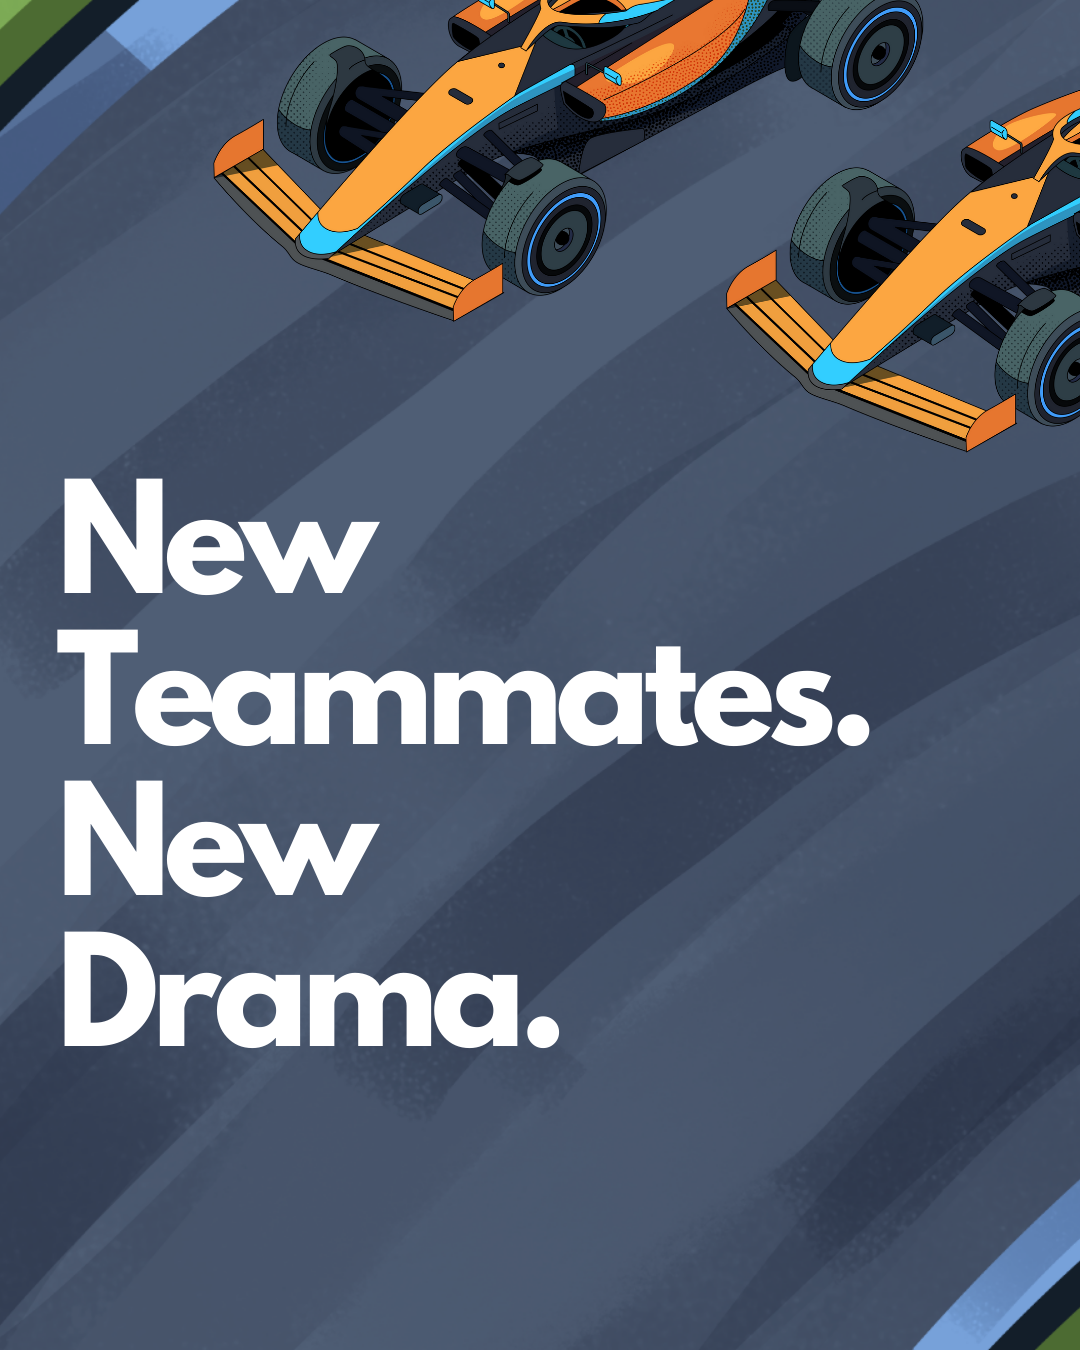 New Teammates means New DRAMA! F1 is Officially Back!